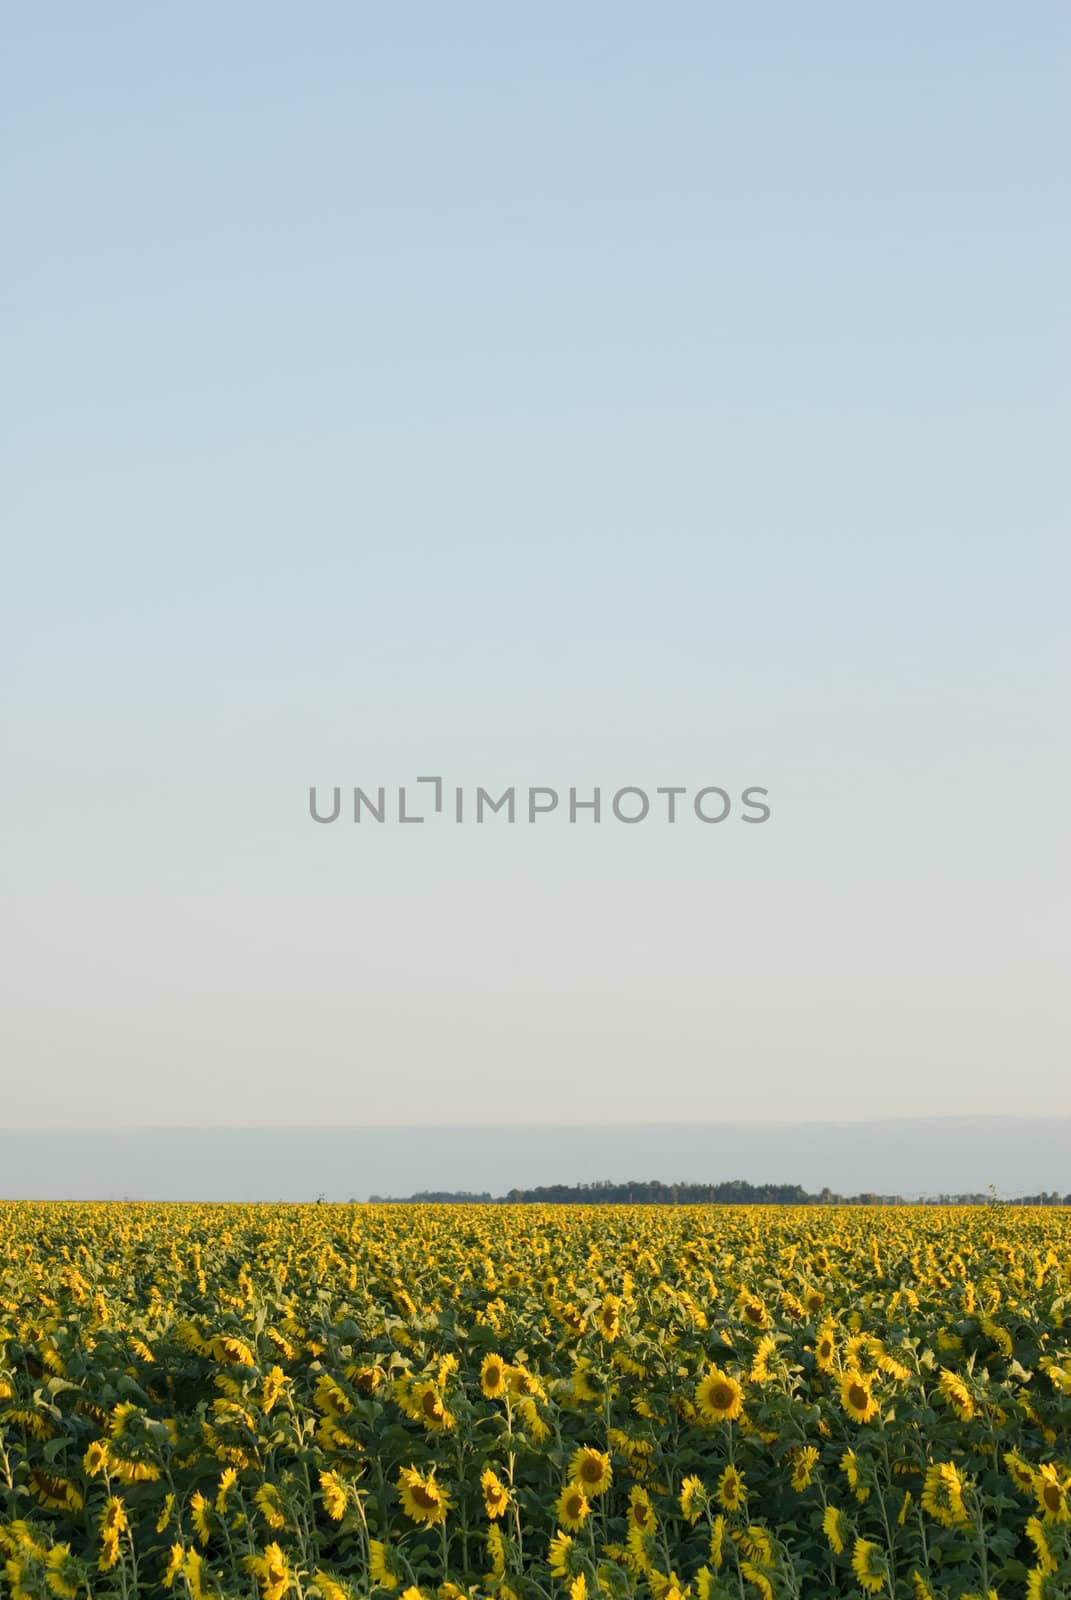 A sunflower field with copyspace in the sky above it